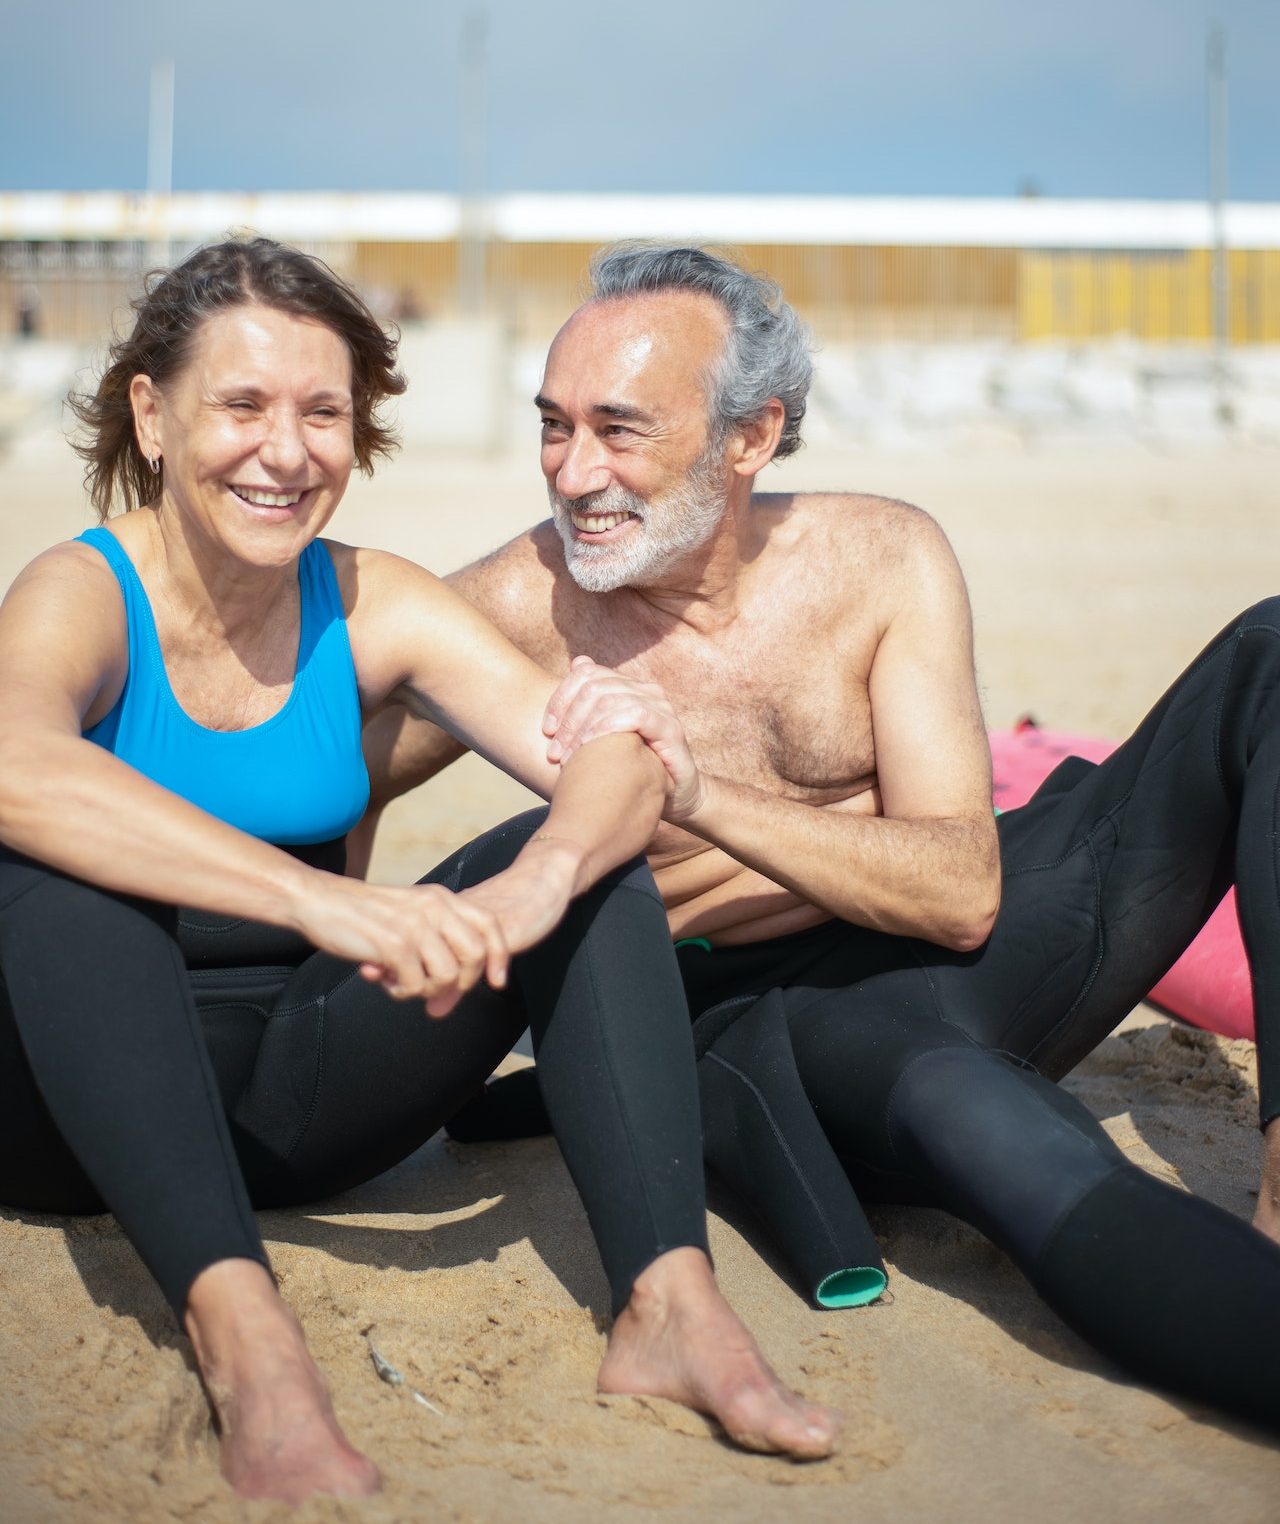 senior man and woman on sunny beach in wetsuits